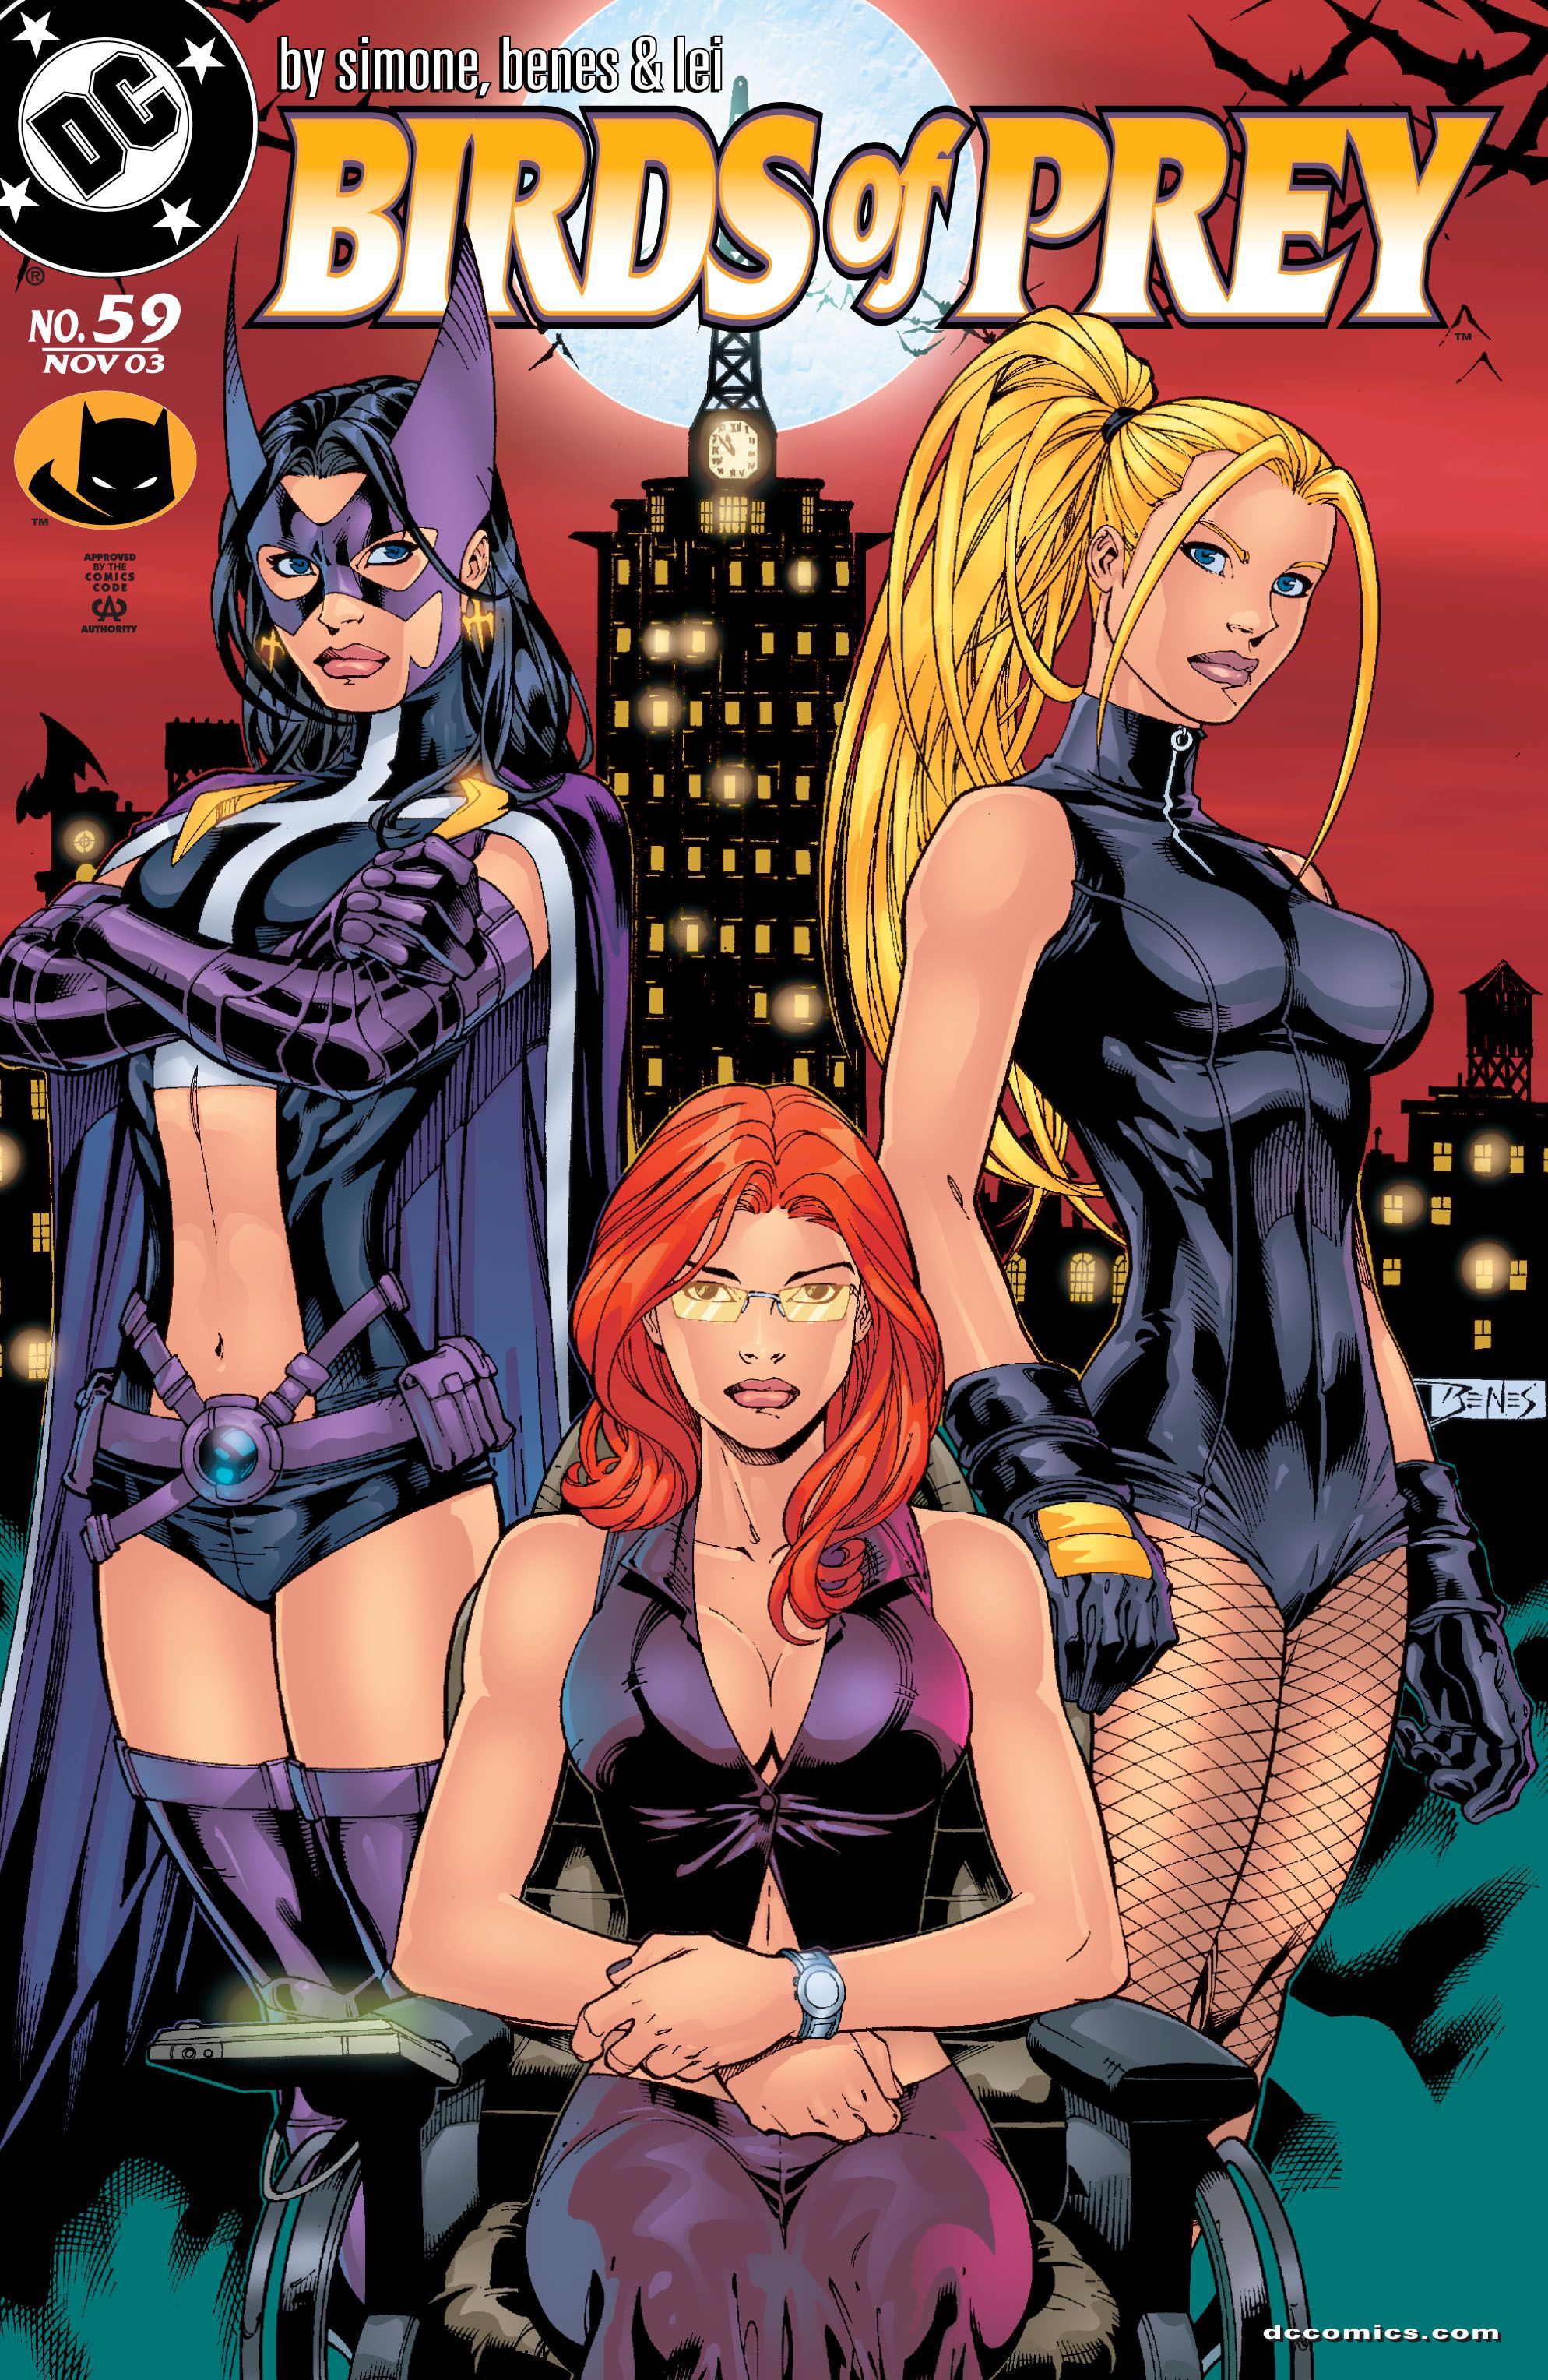 Huntress joins the Birds of Prey